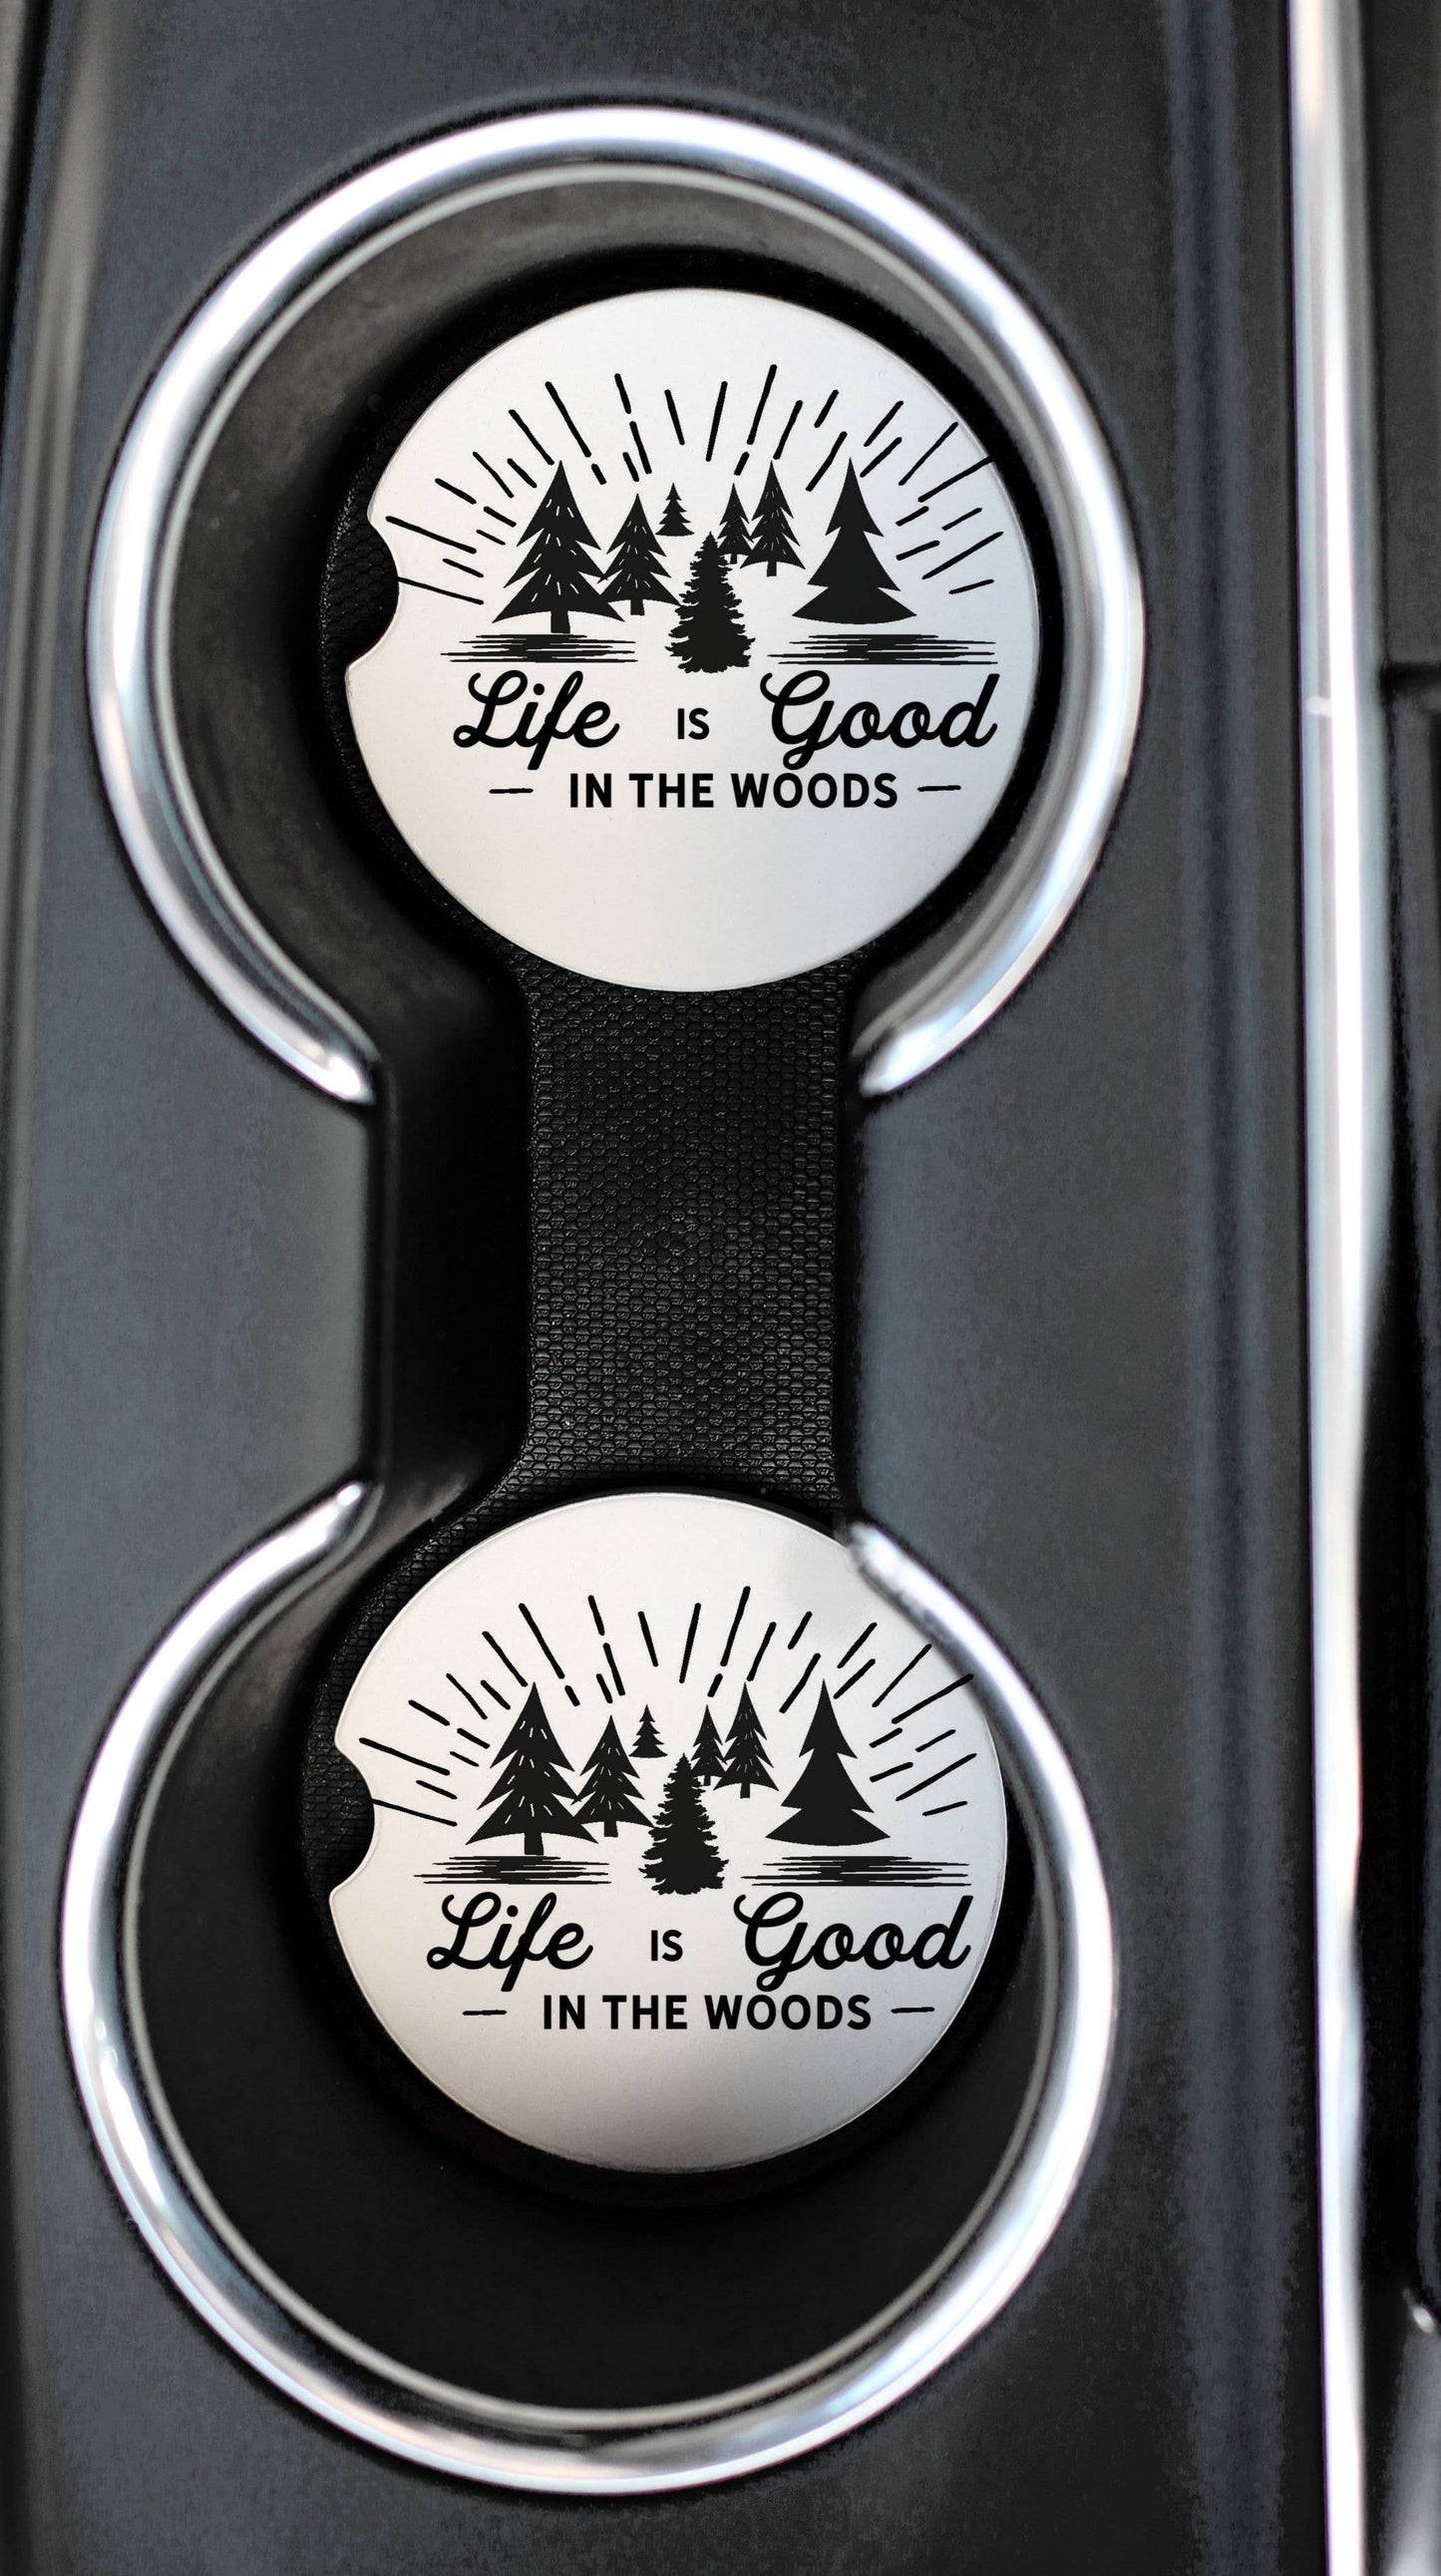 Life in the Woods Car Coaster - Set of 2